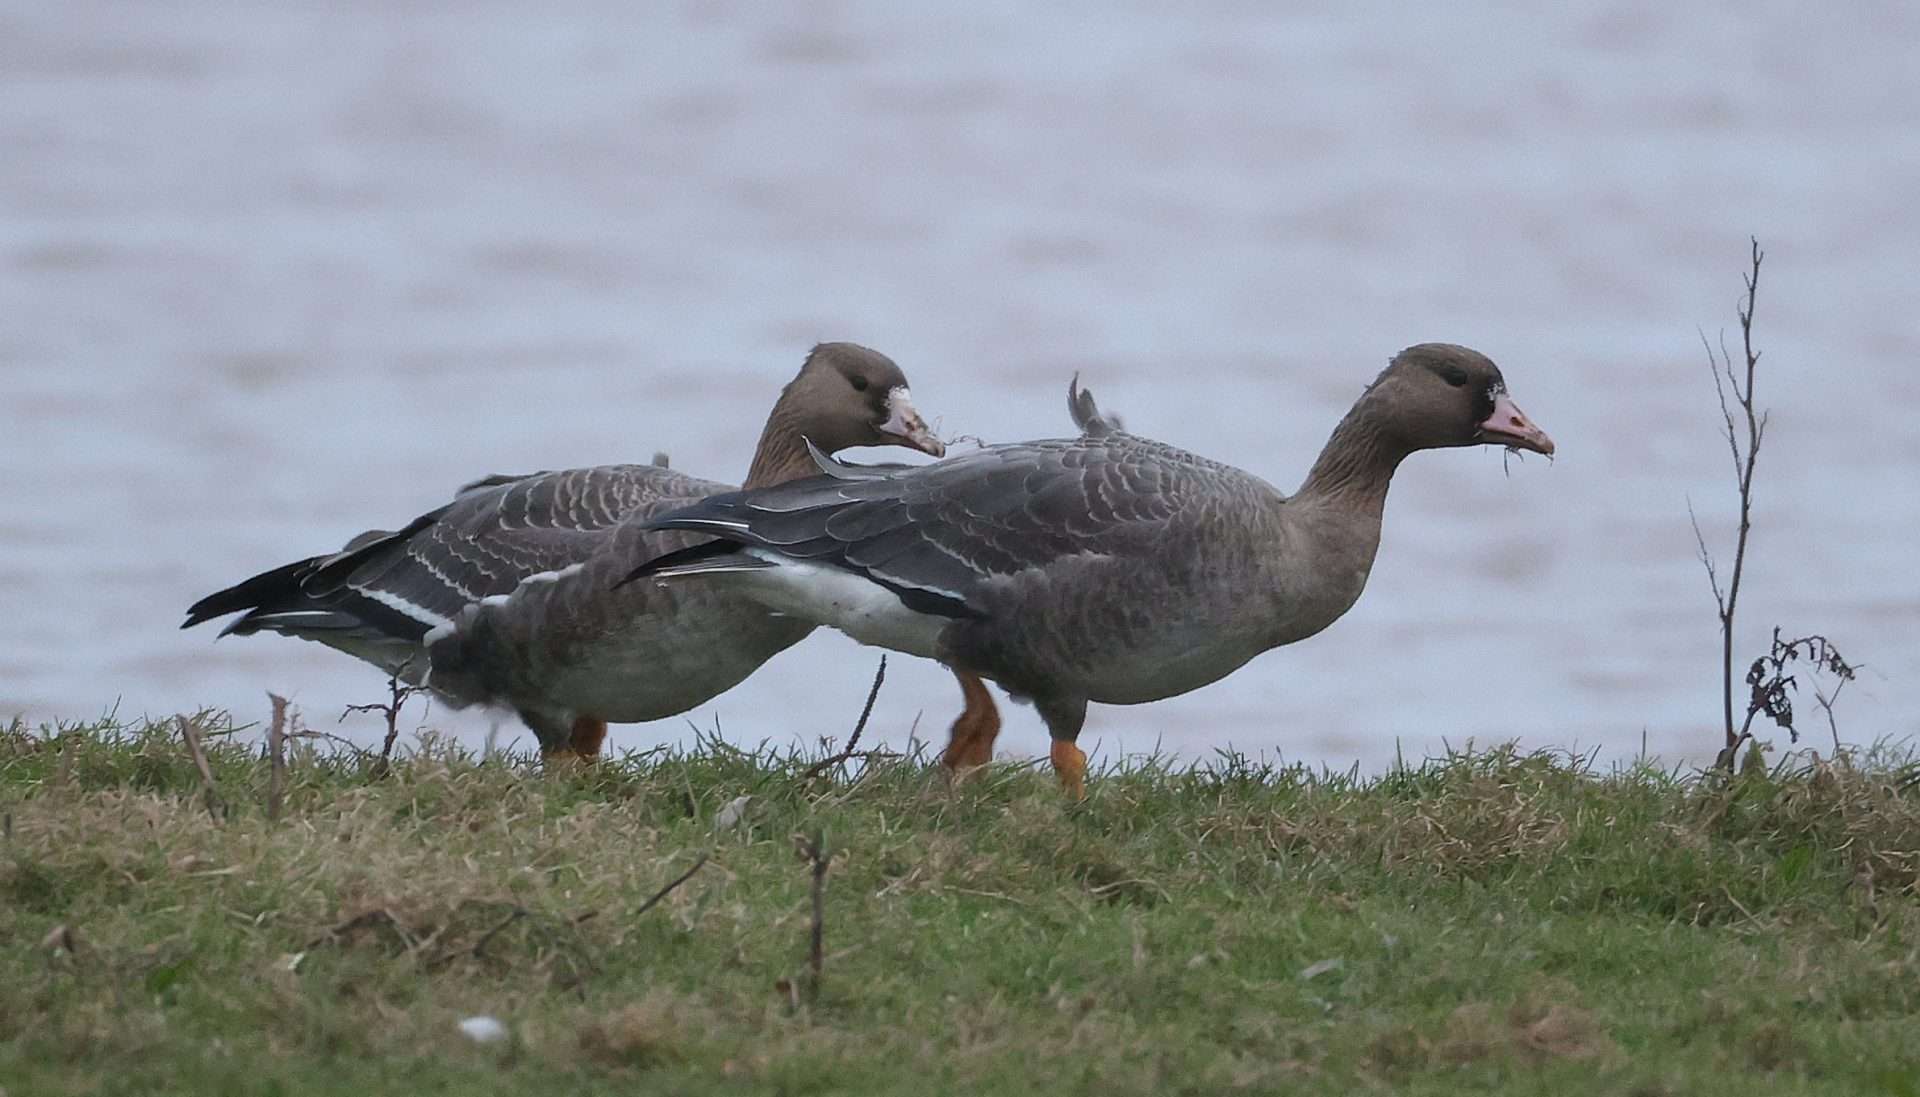 White Fronted Goose by Steve Hopper at South Huish